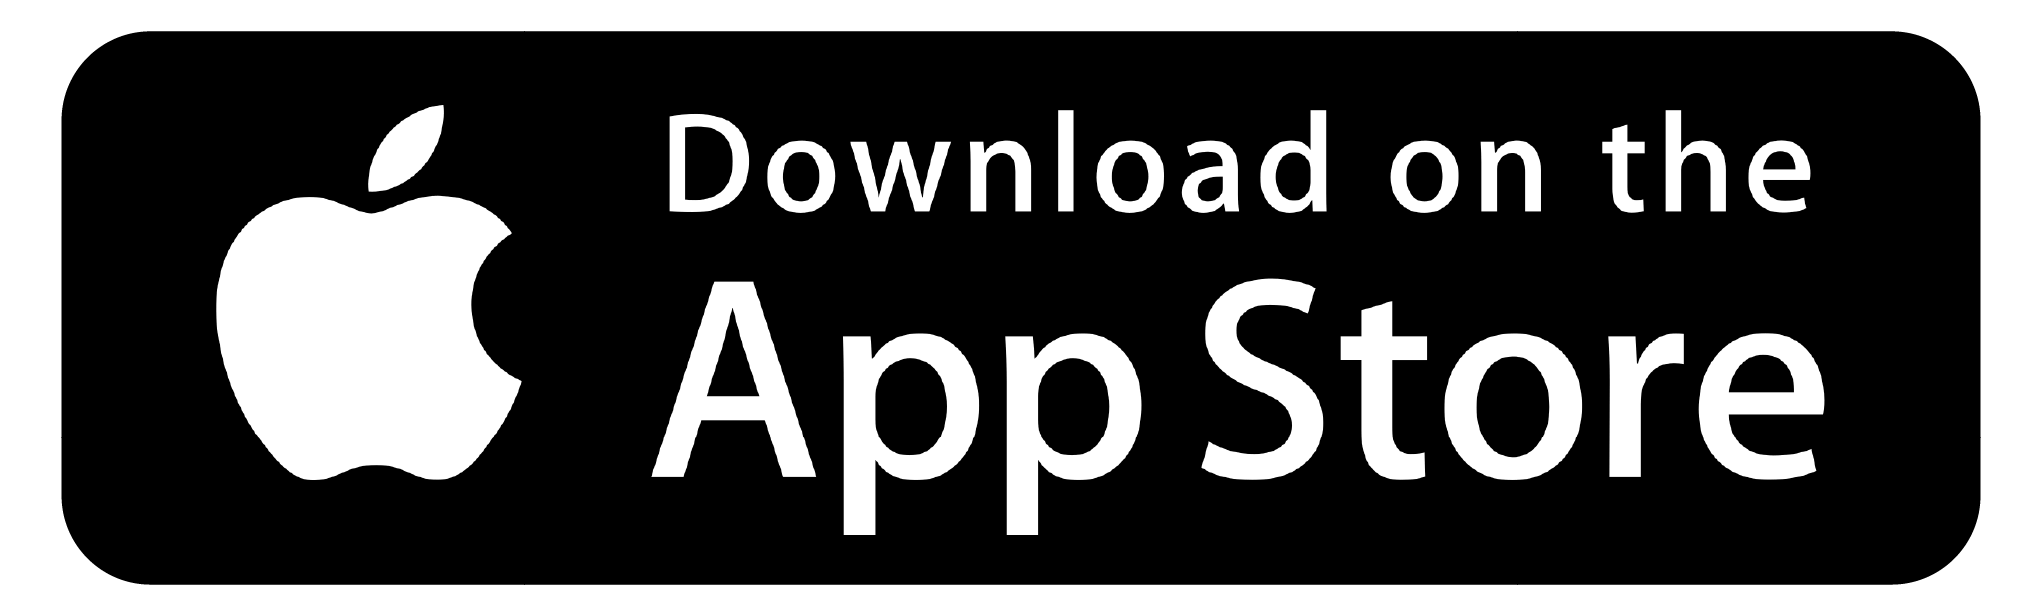 download ios app from app store for online funds transfer